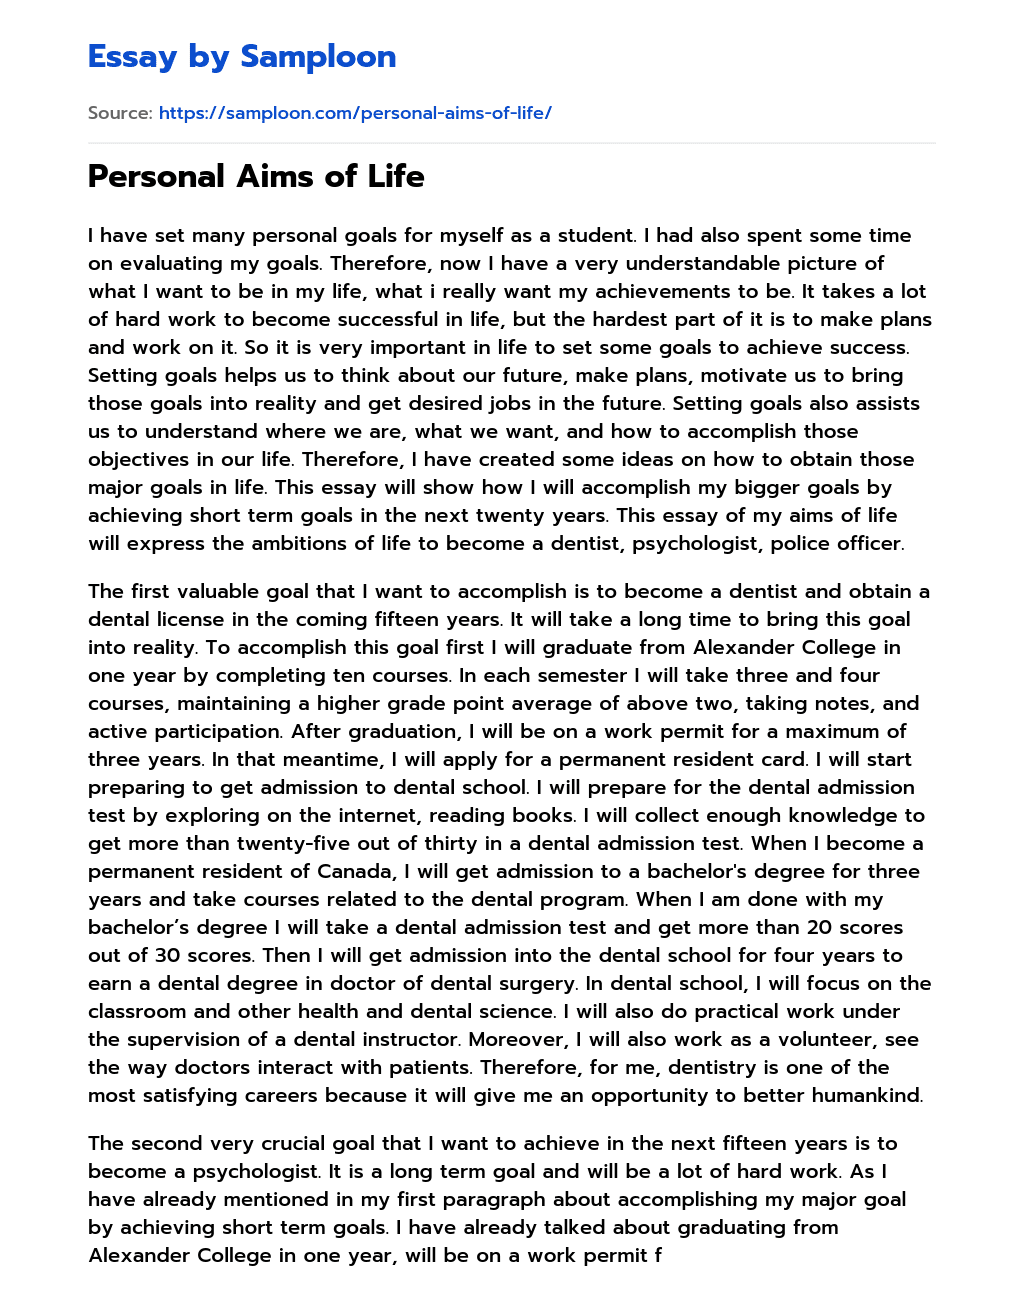 Personal Aims of Life essay